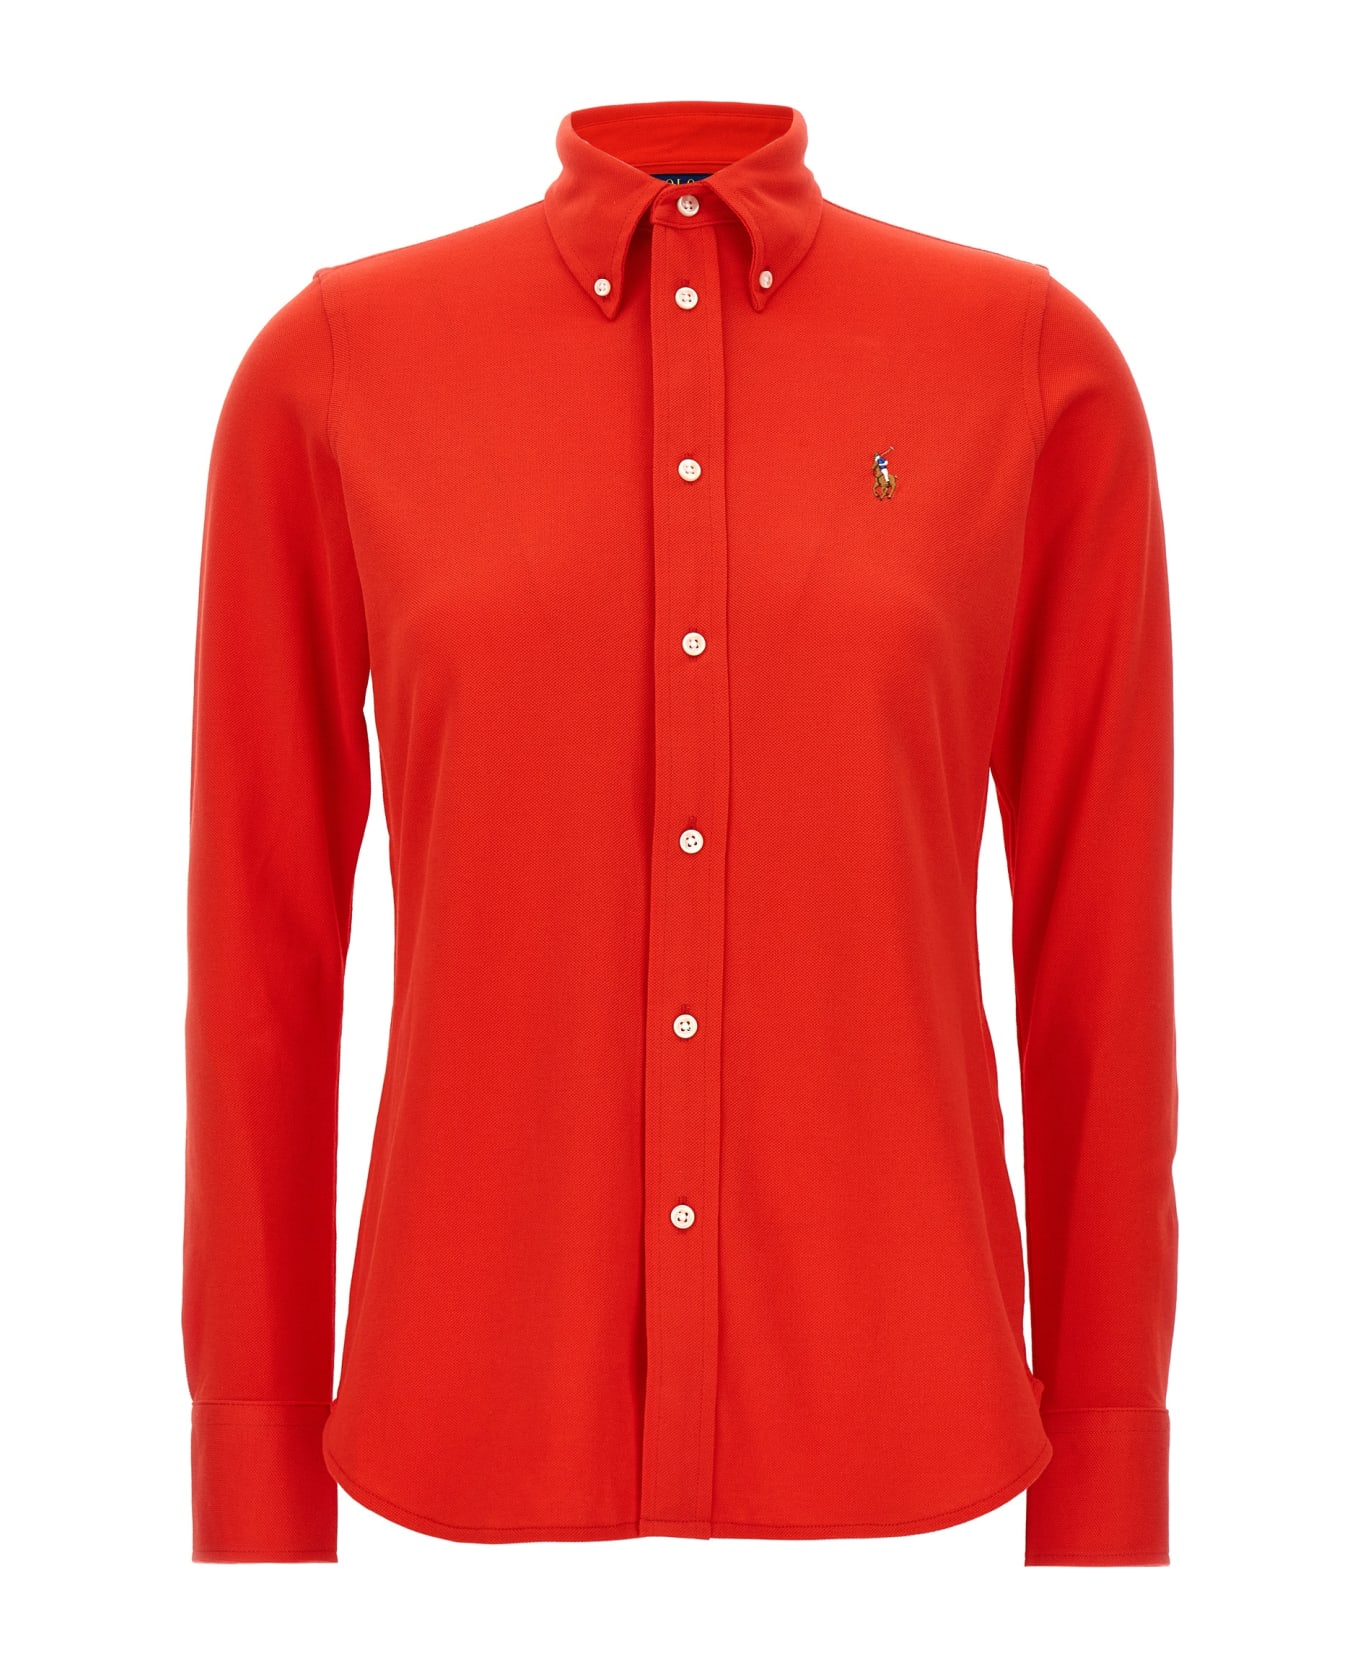 Polo Ralph Lauren Logo Embroidery Shirt - Red シャツ